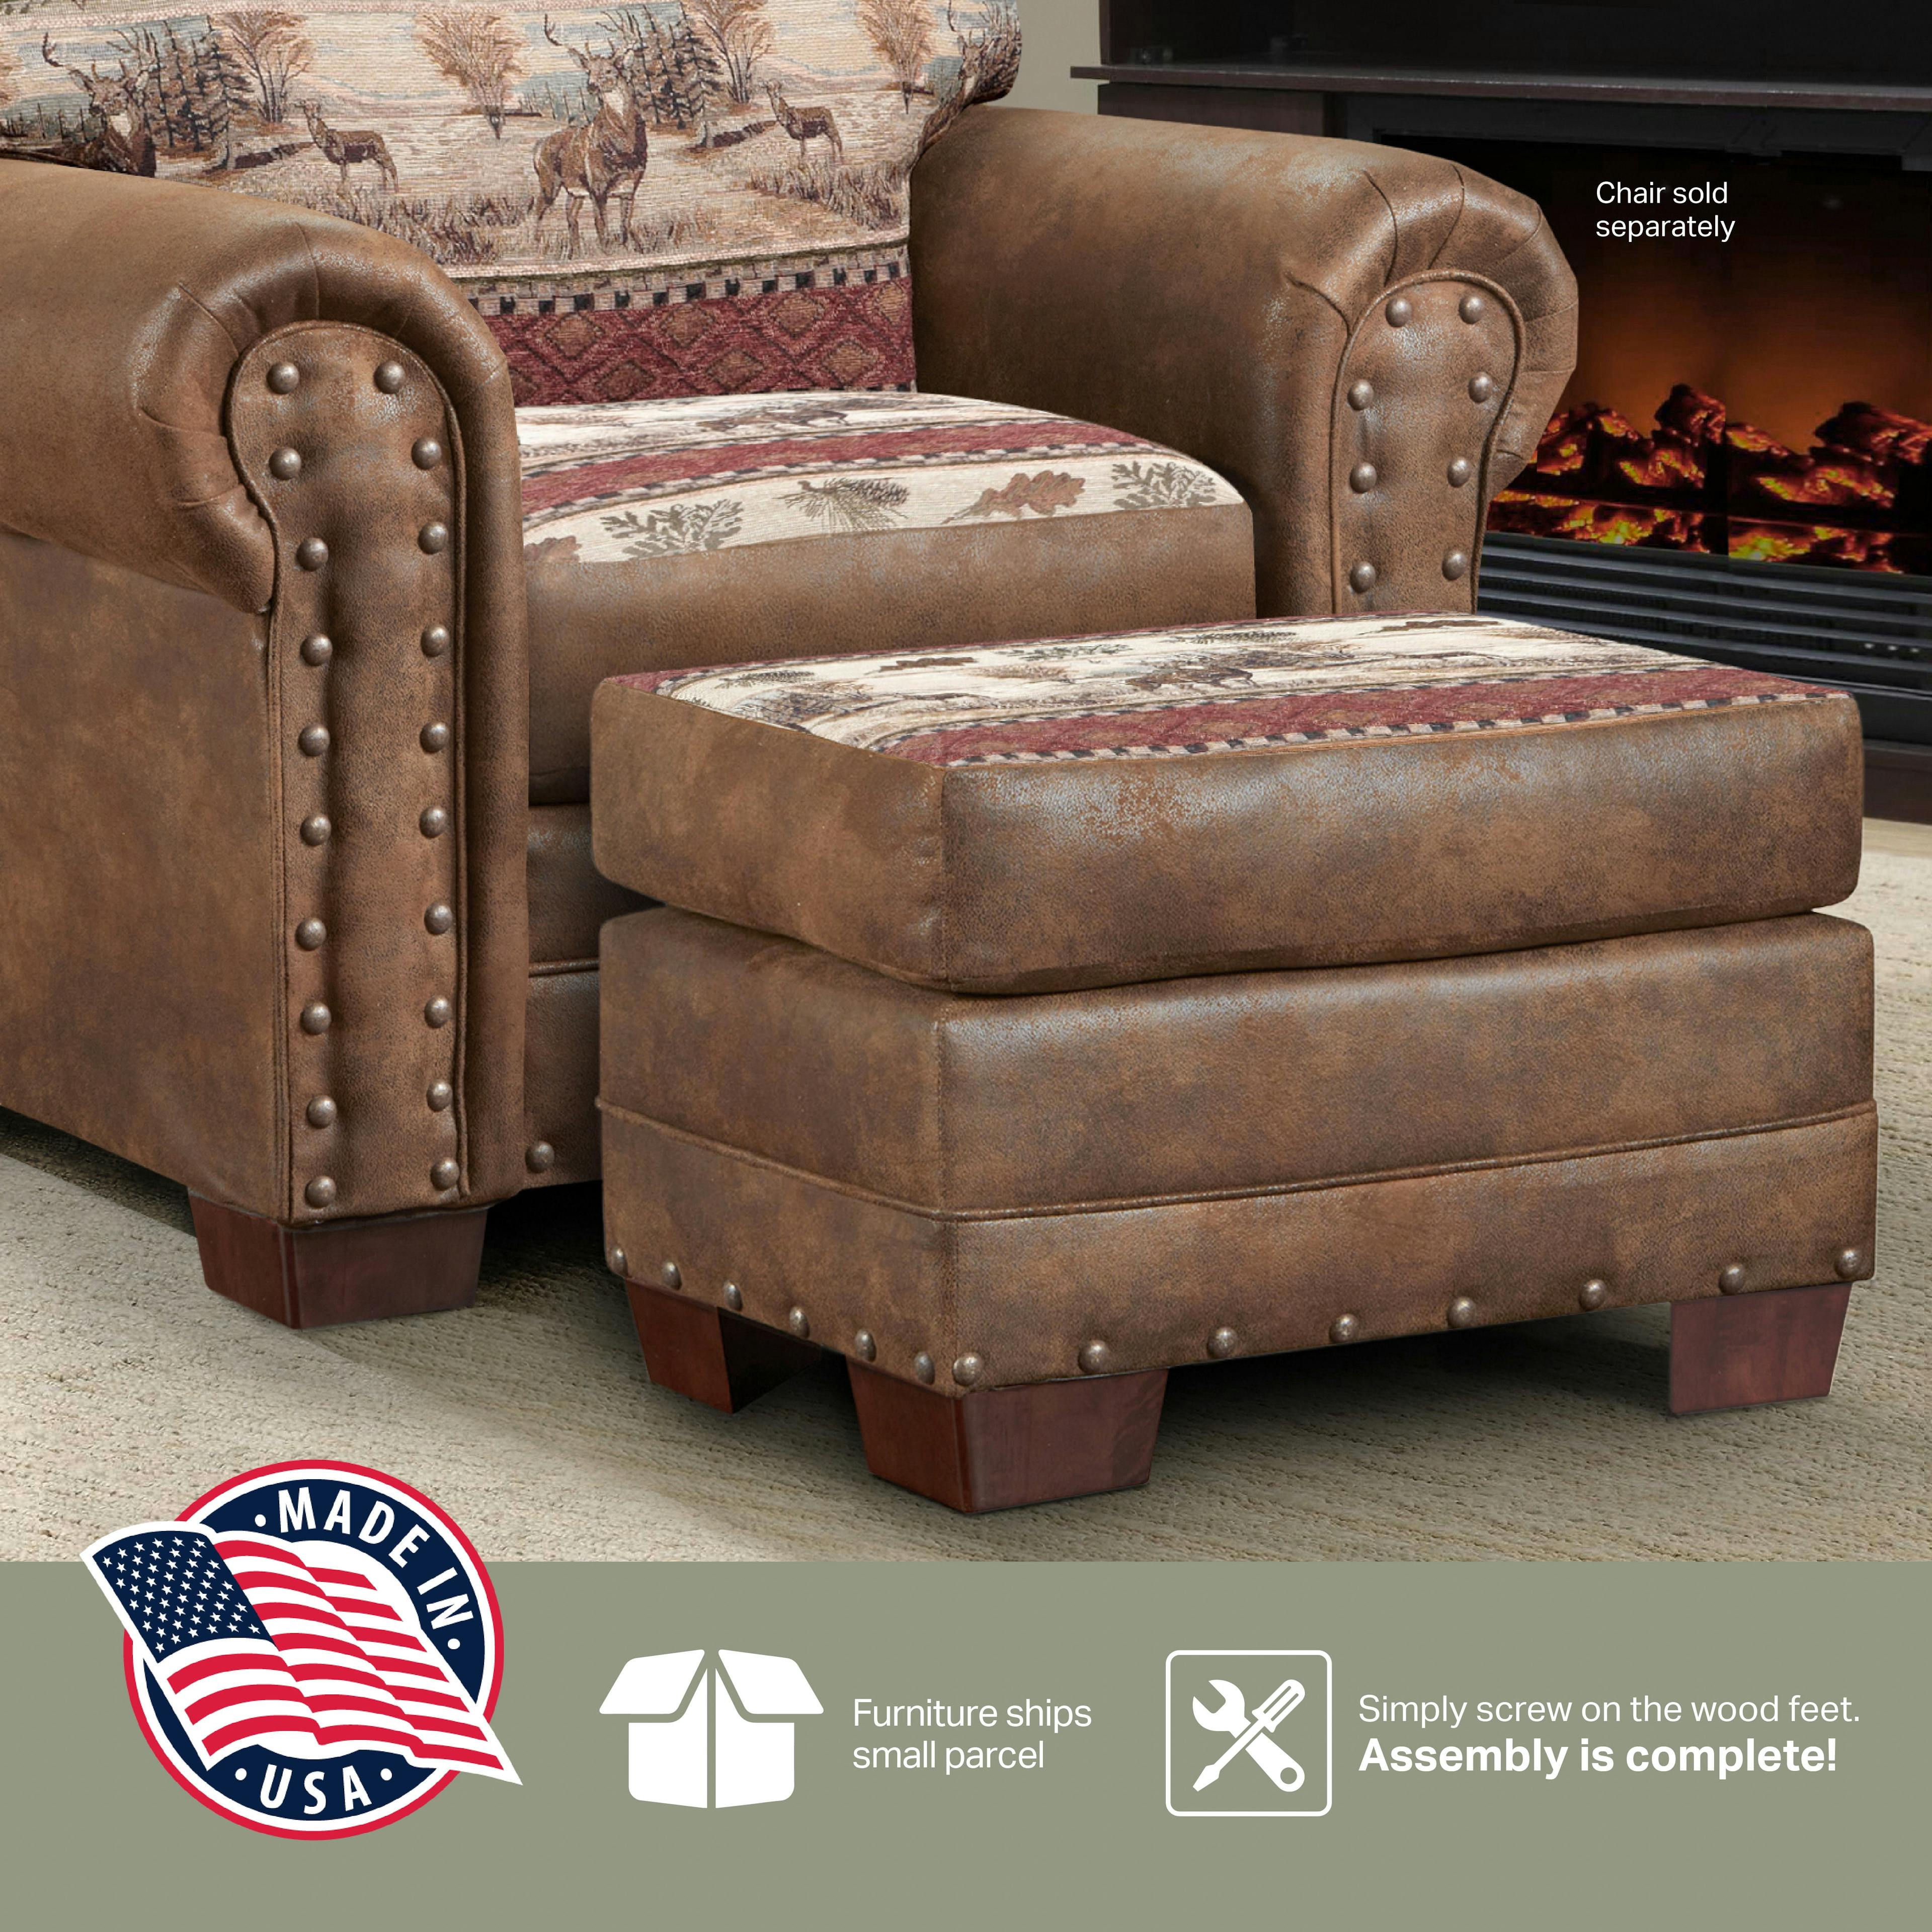 Deer Valley Rustic Lodge-Inspired Ottoman with Nailhead Accents